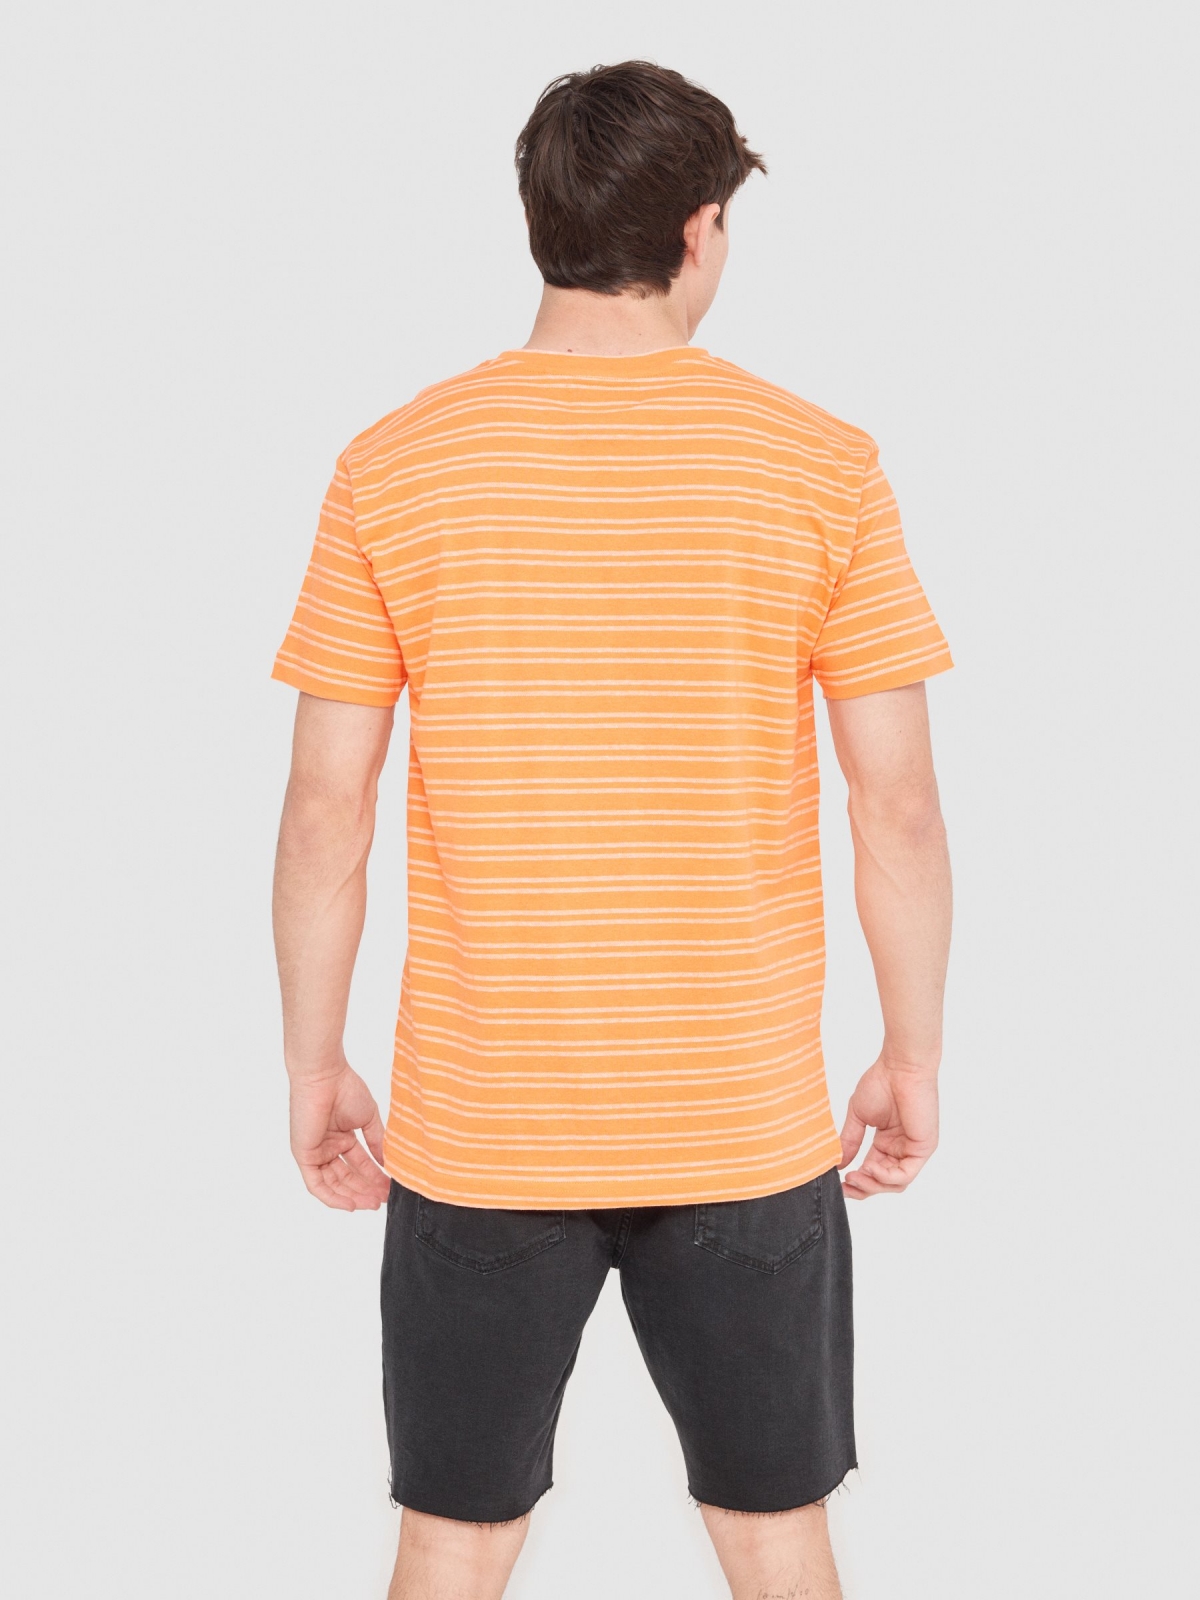 Textured striped T-shirt salmon middle back view